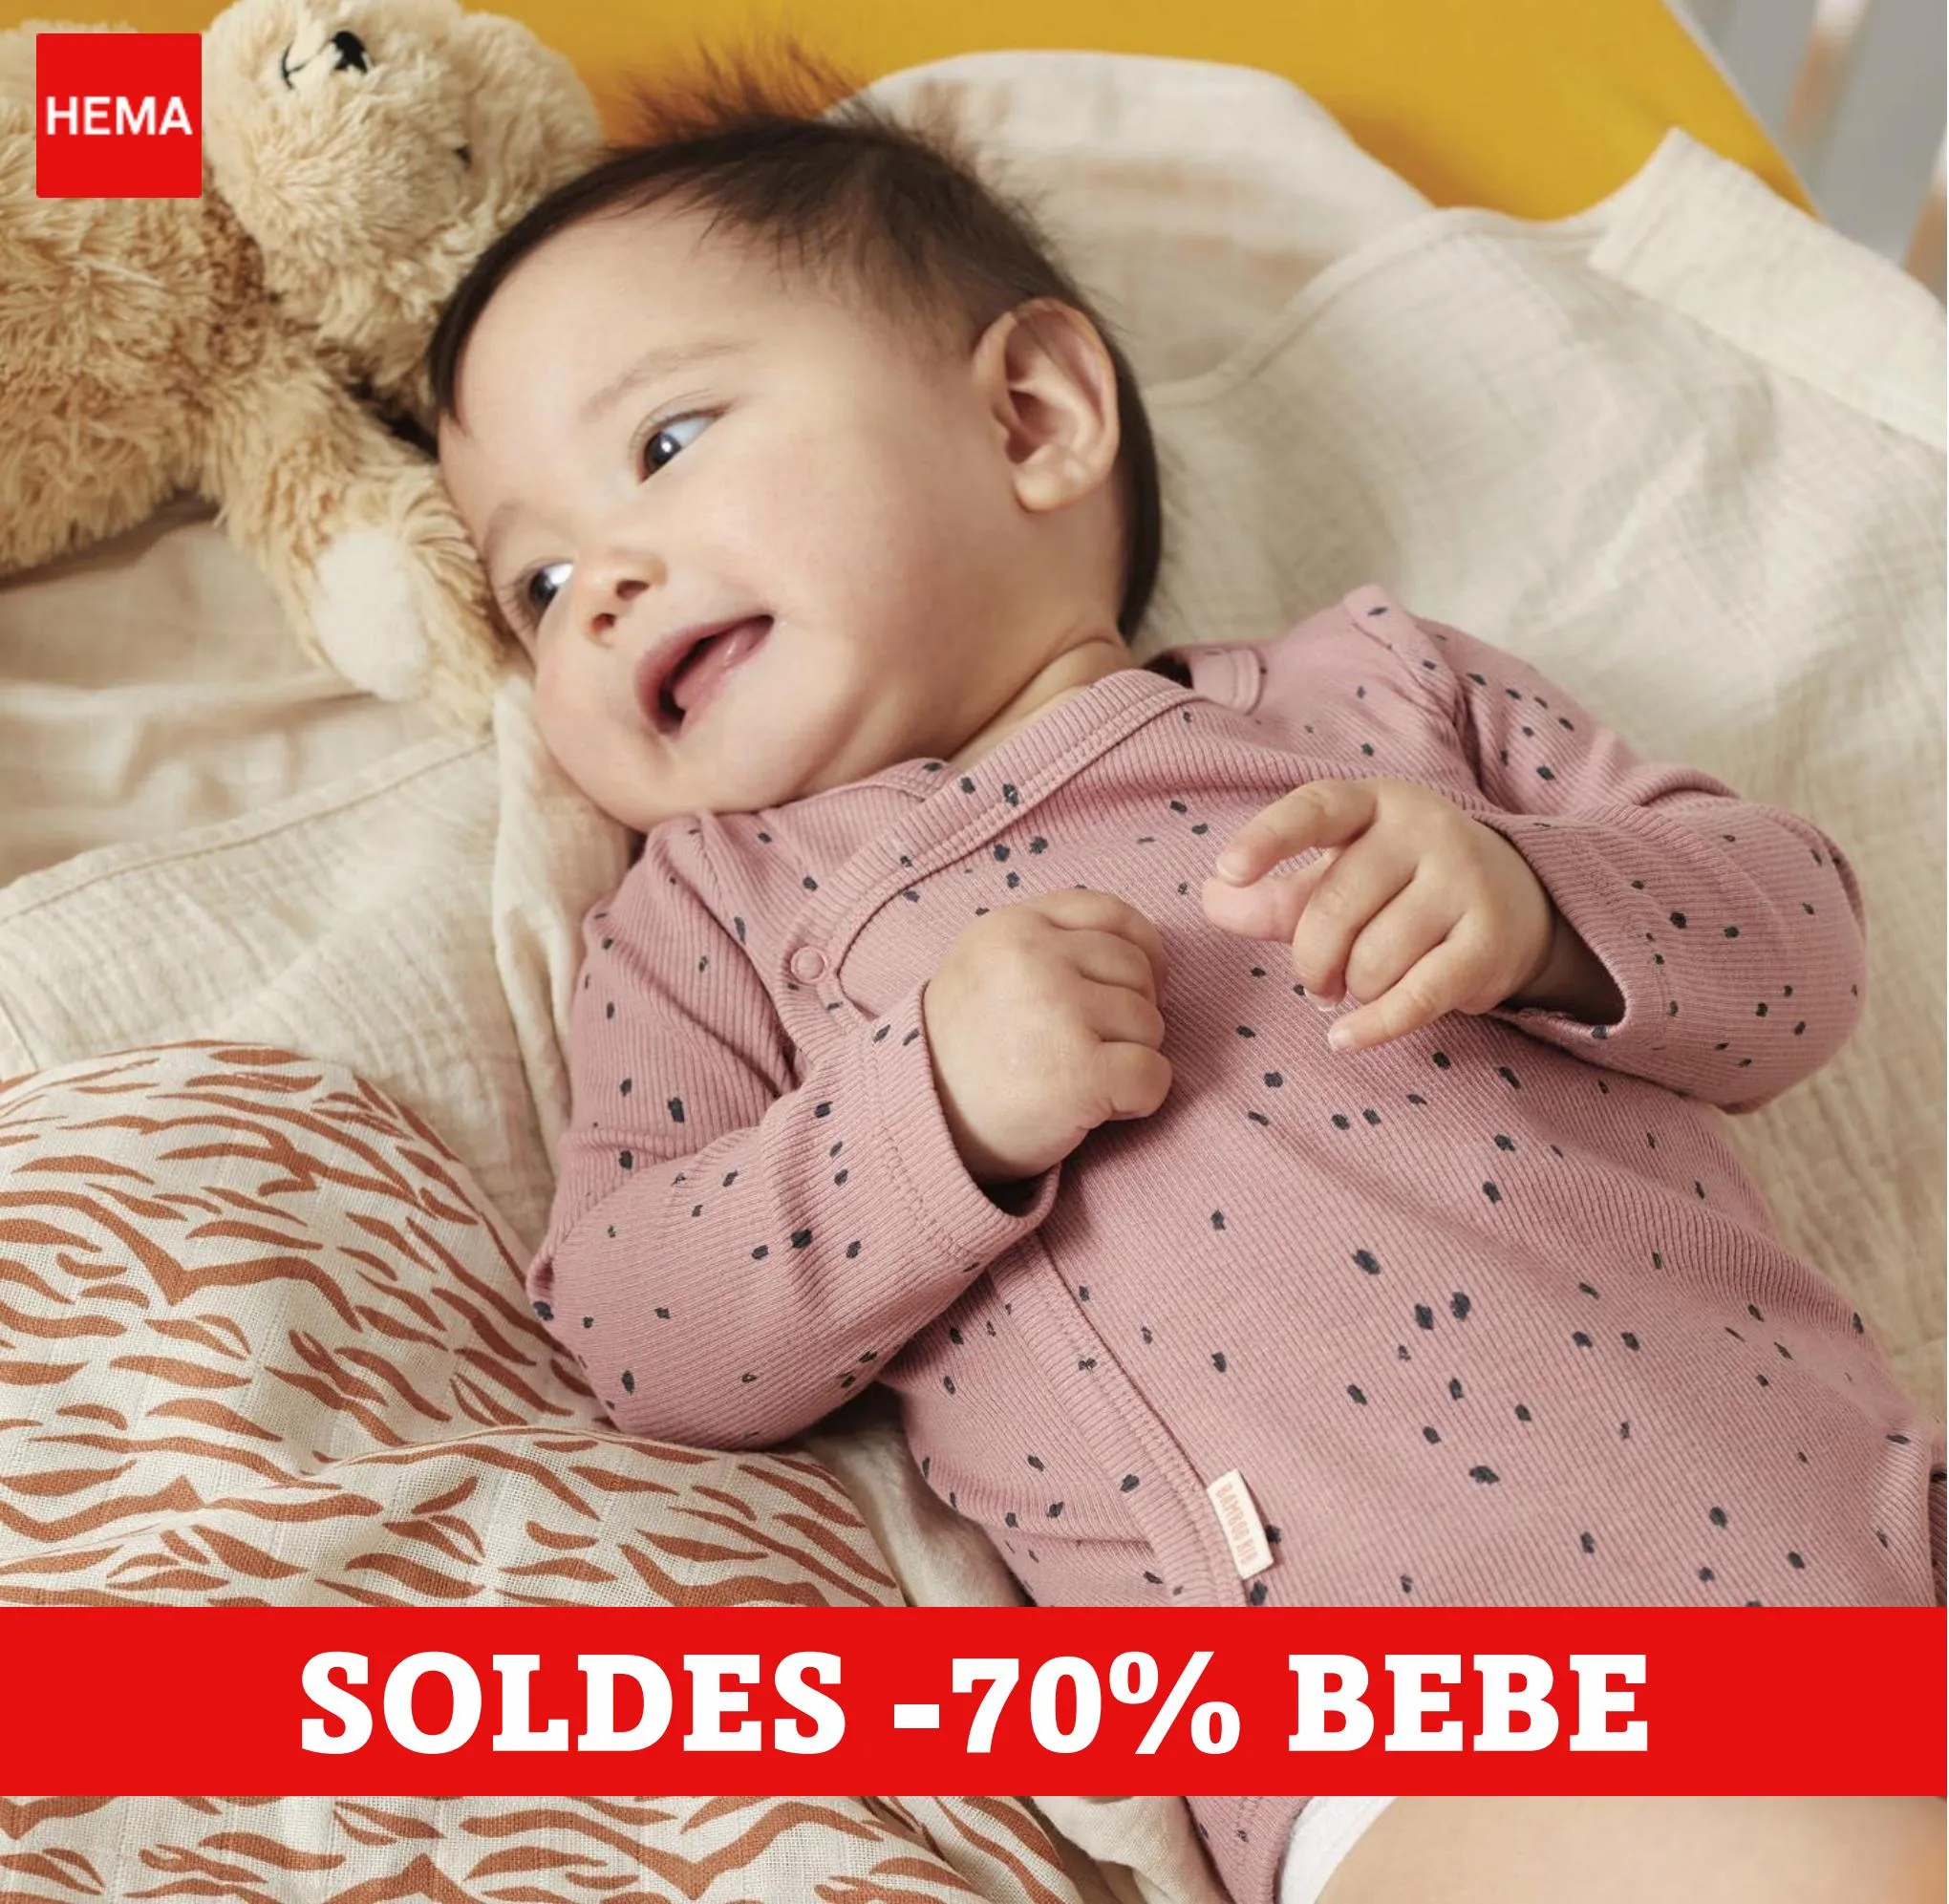 Catalogue SOLDES -70% BEBE, page 00001